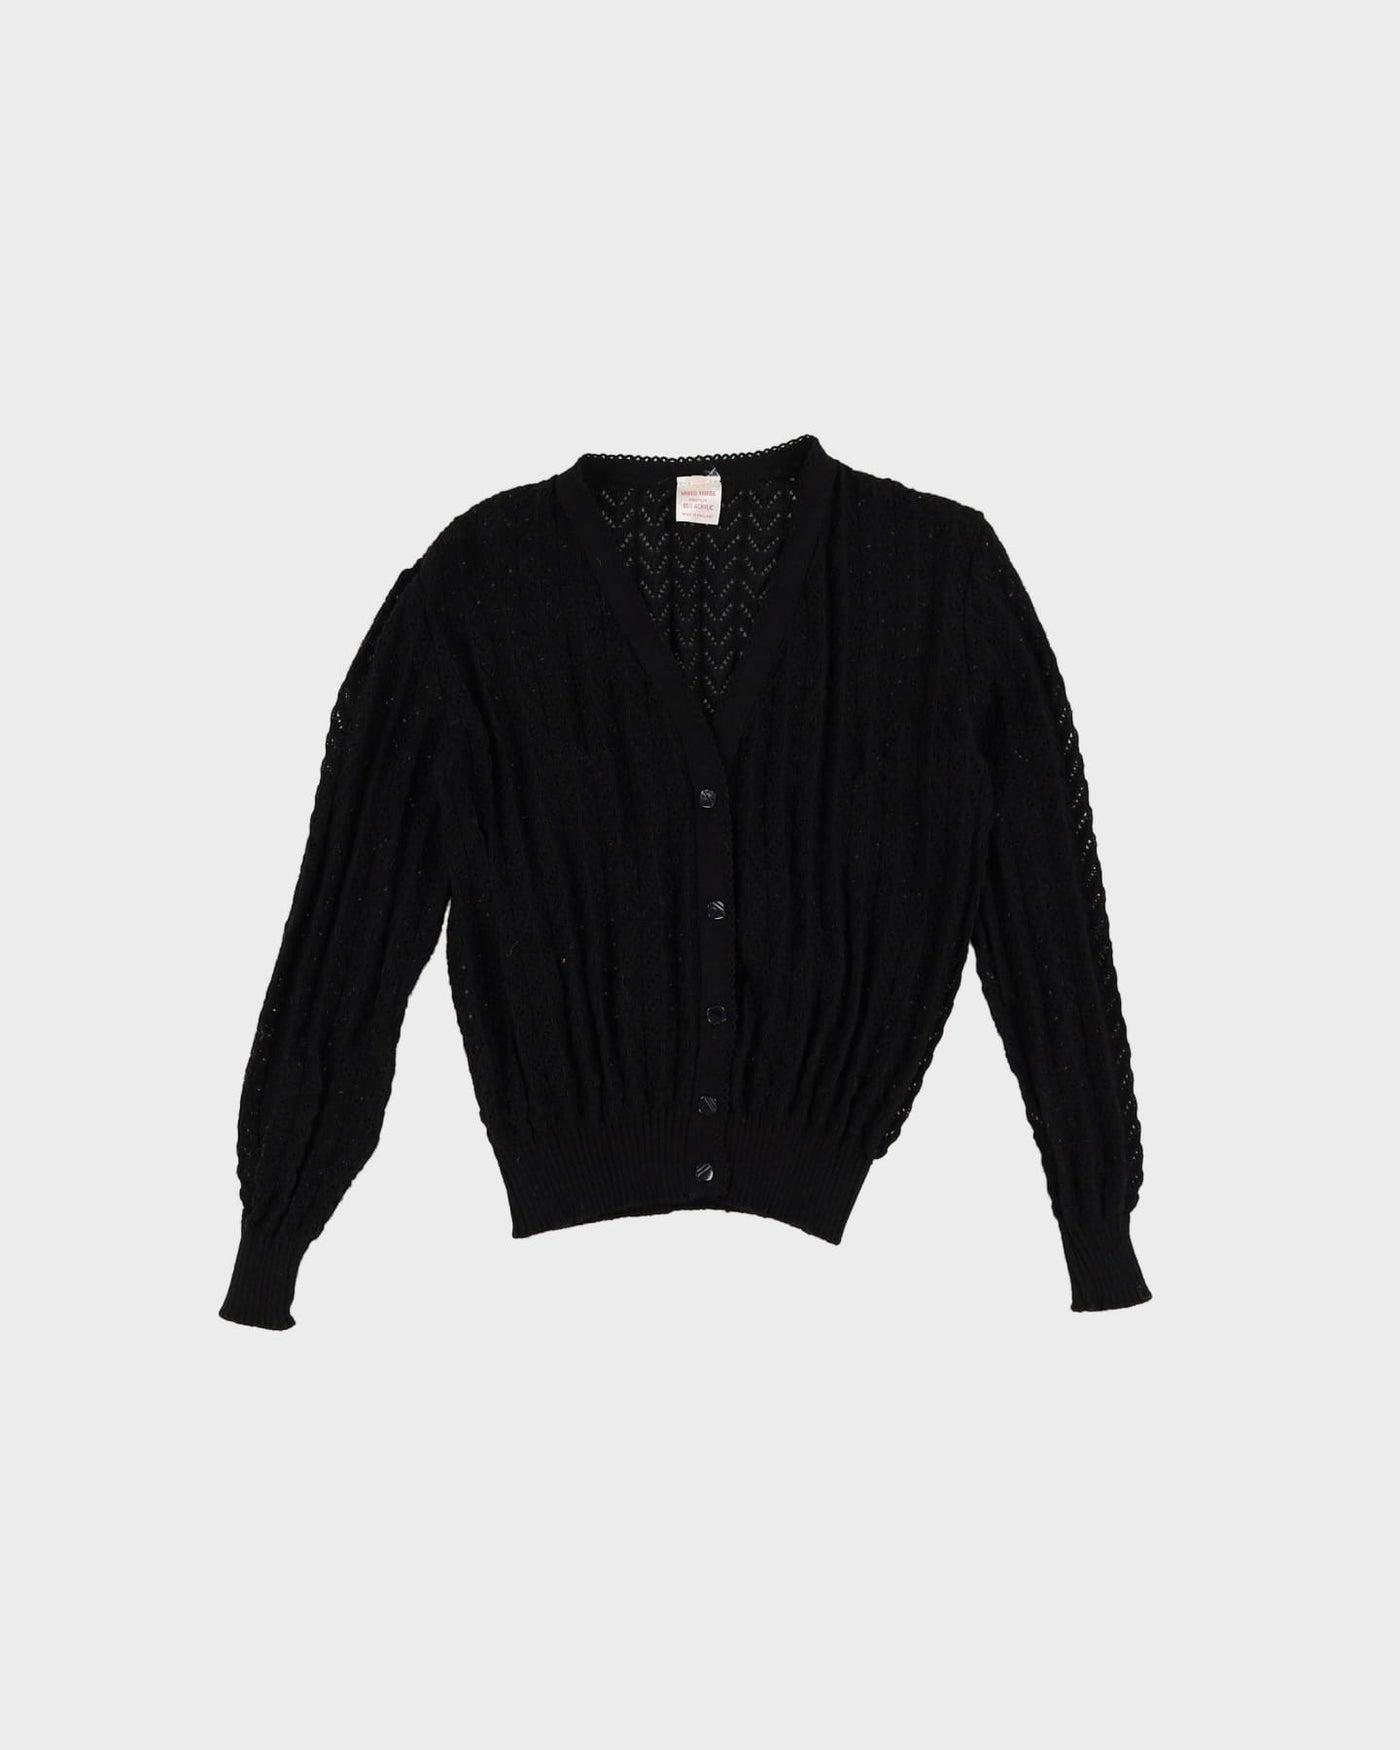 1980s Black Lace Knitted Cardigan - S